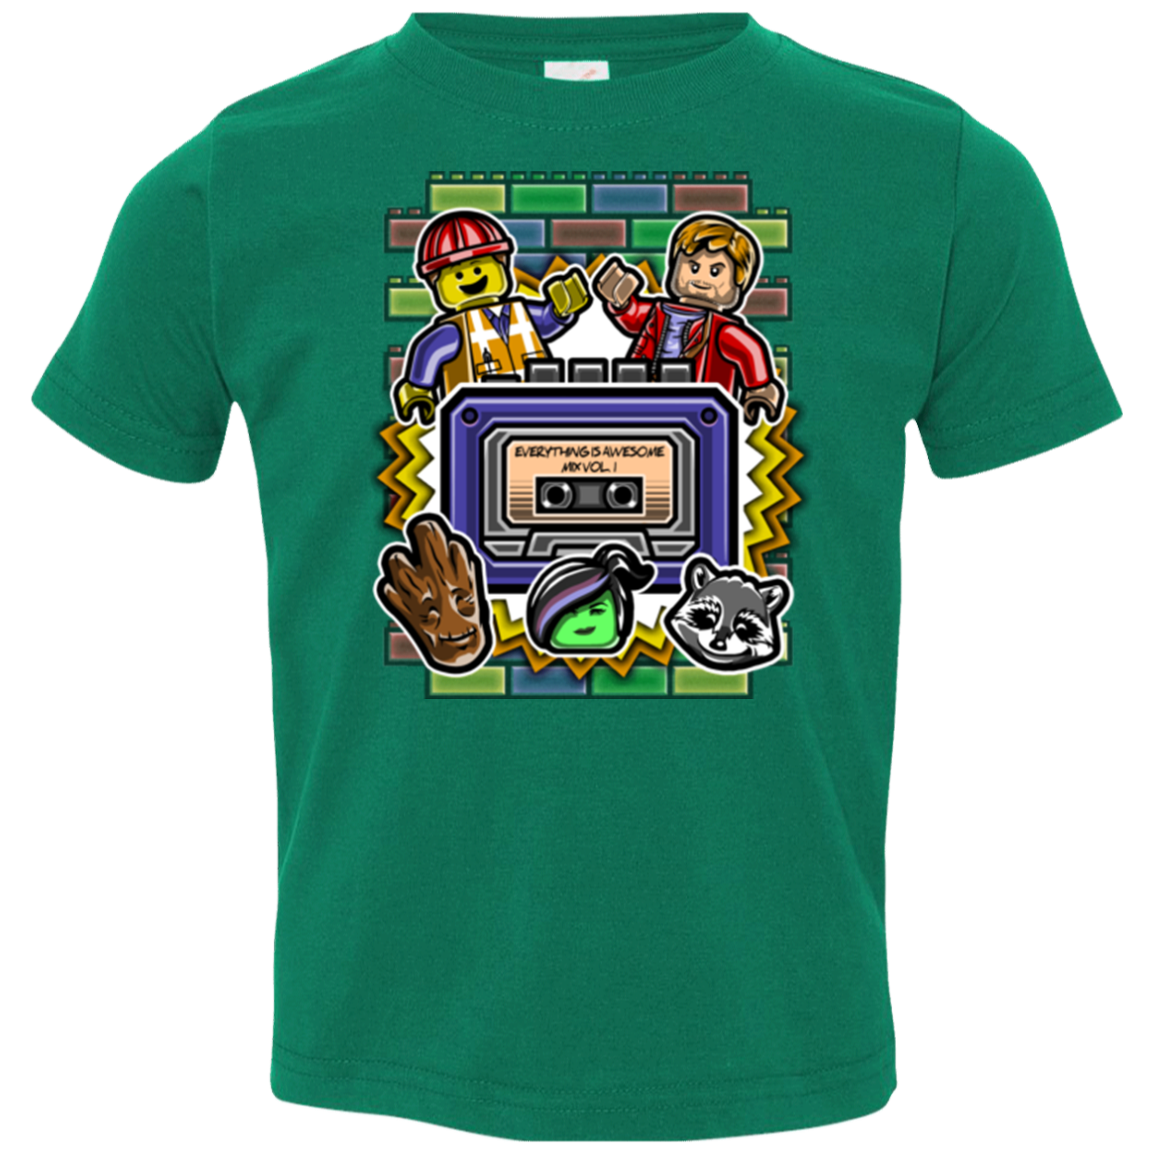 Everything is awesome mix Toddler Premium T-Shirt